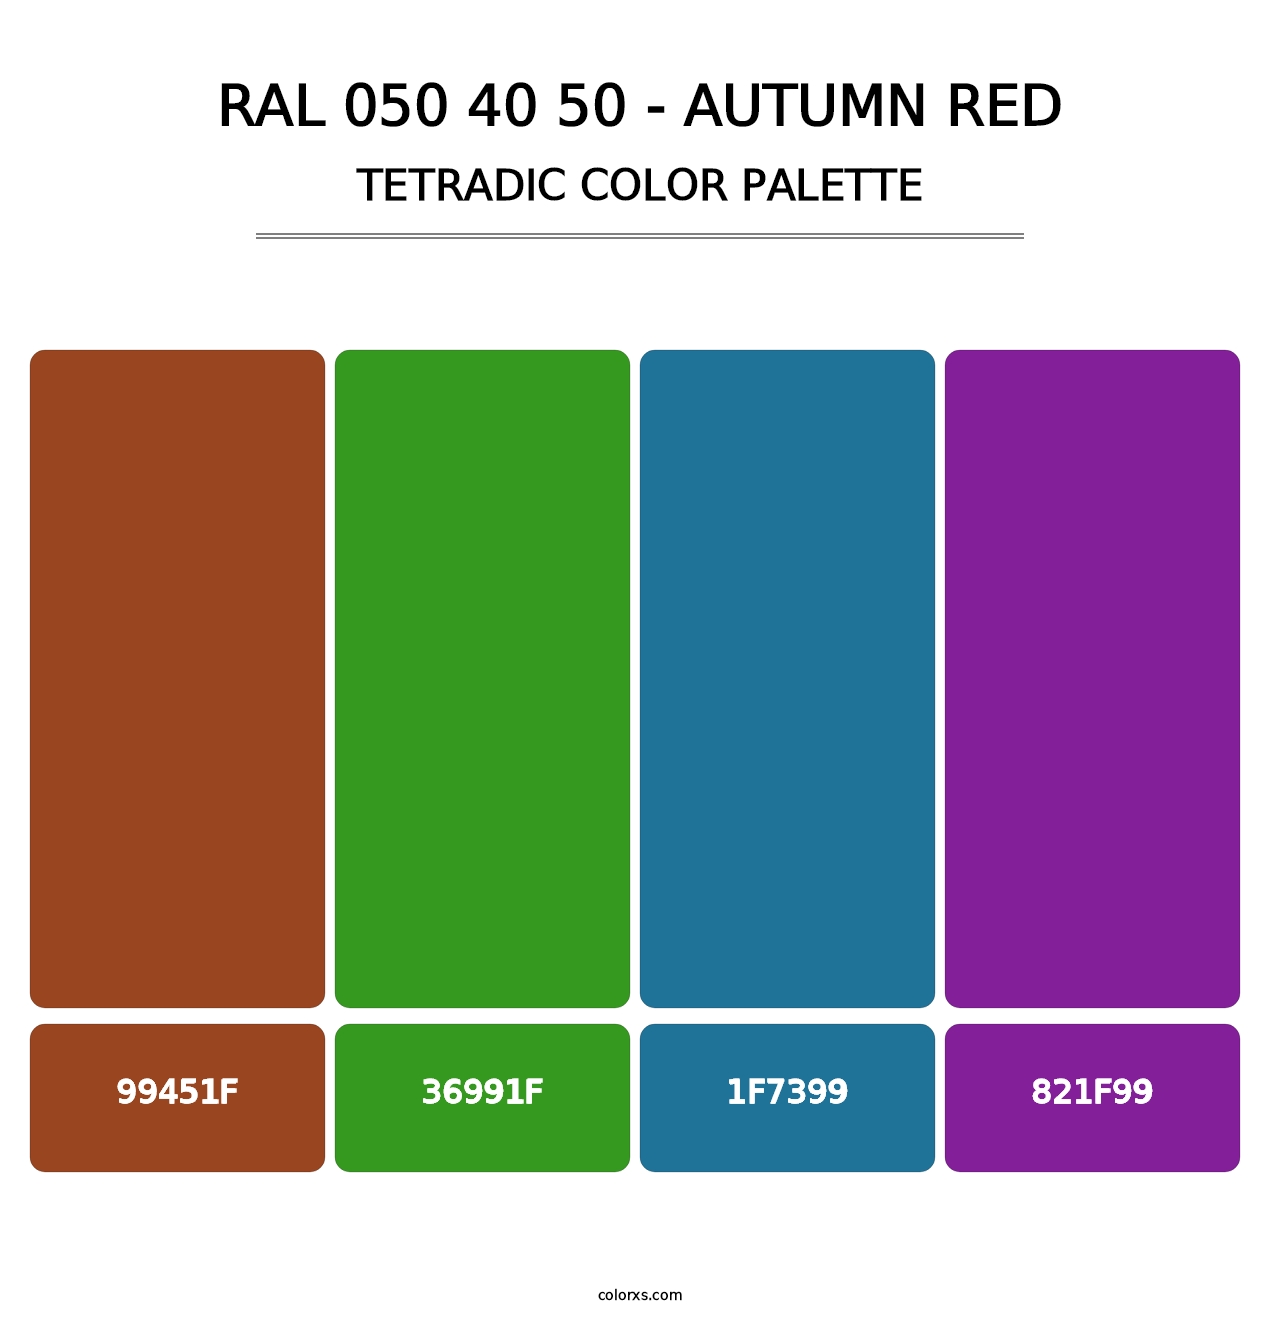 RAL 050 40 50 - Autumn Red - Tetradic Color Palette